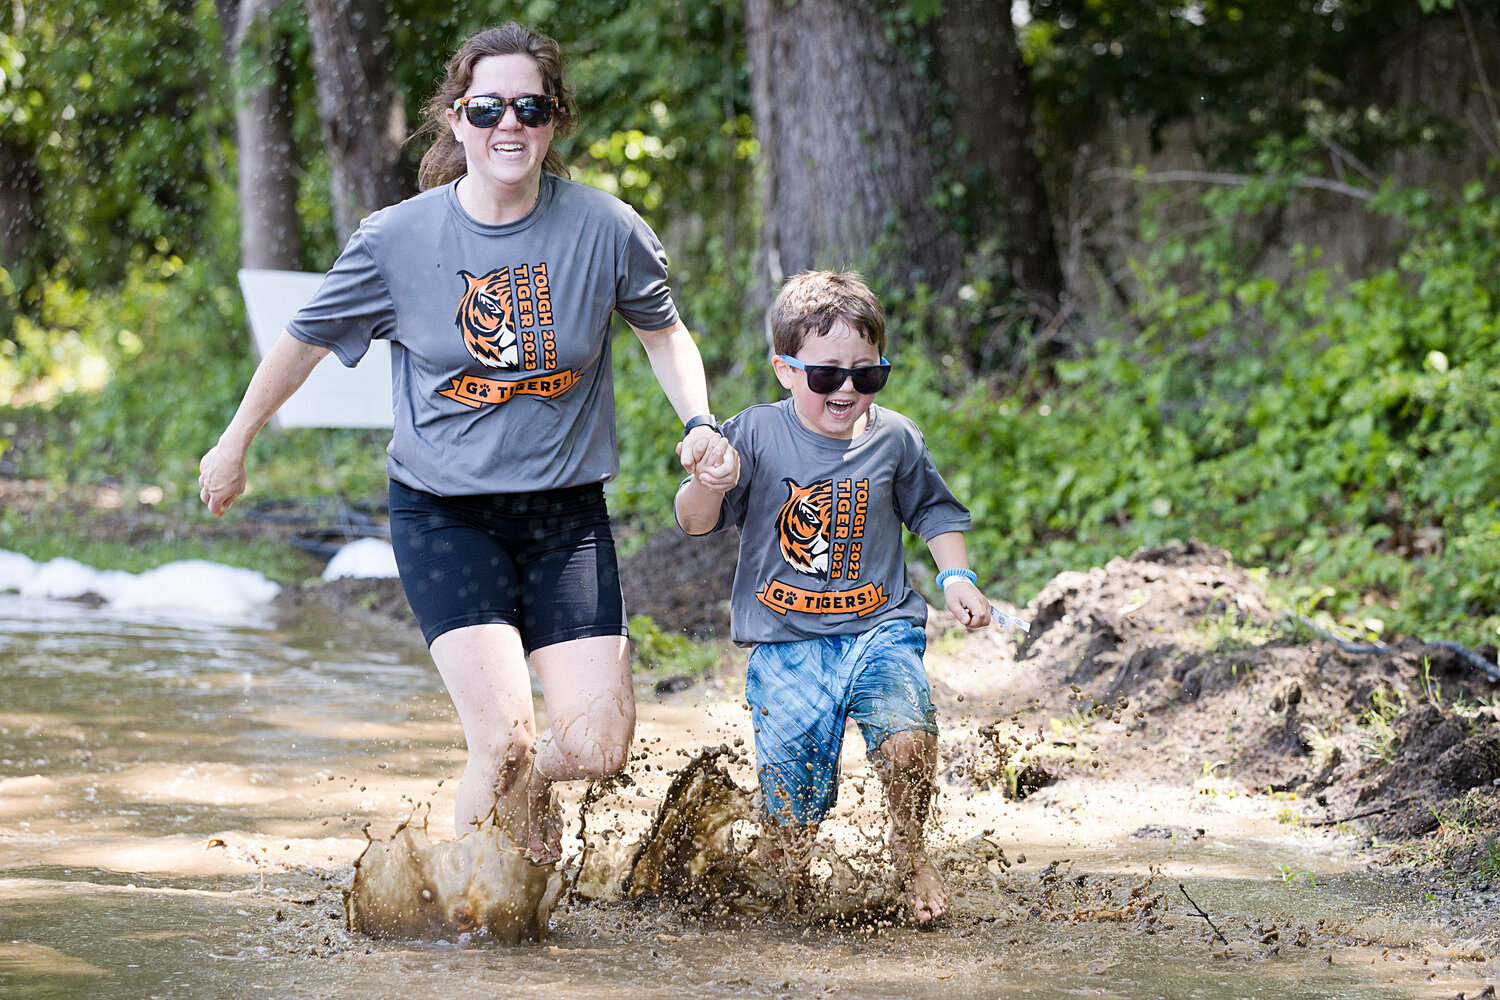 Competitors splash through the mud while participating in Hampden Meadow's "Tough Tiger" event, Sunday.